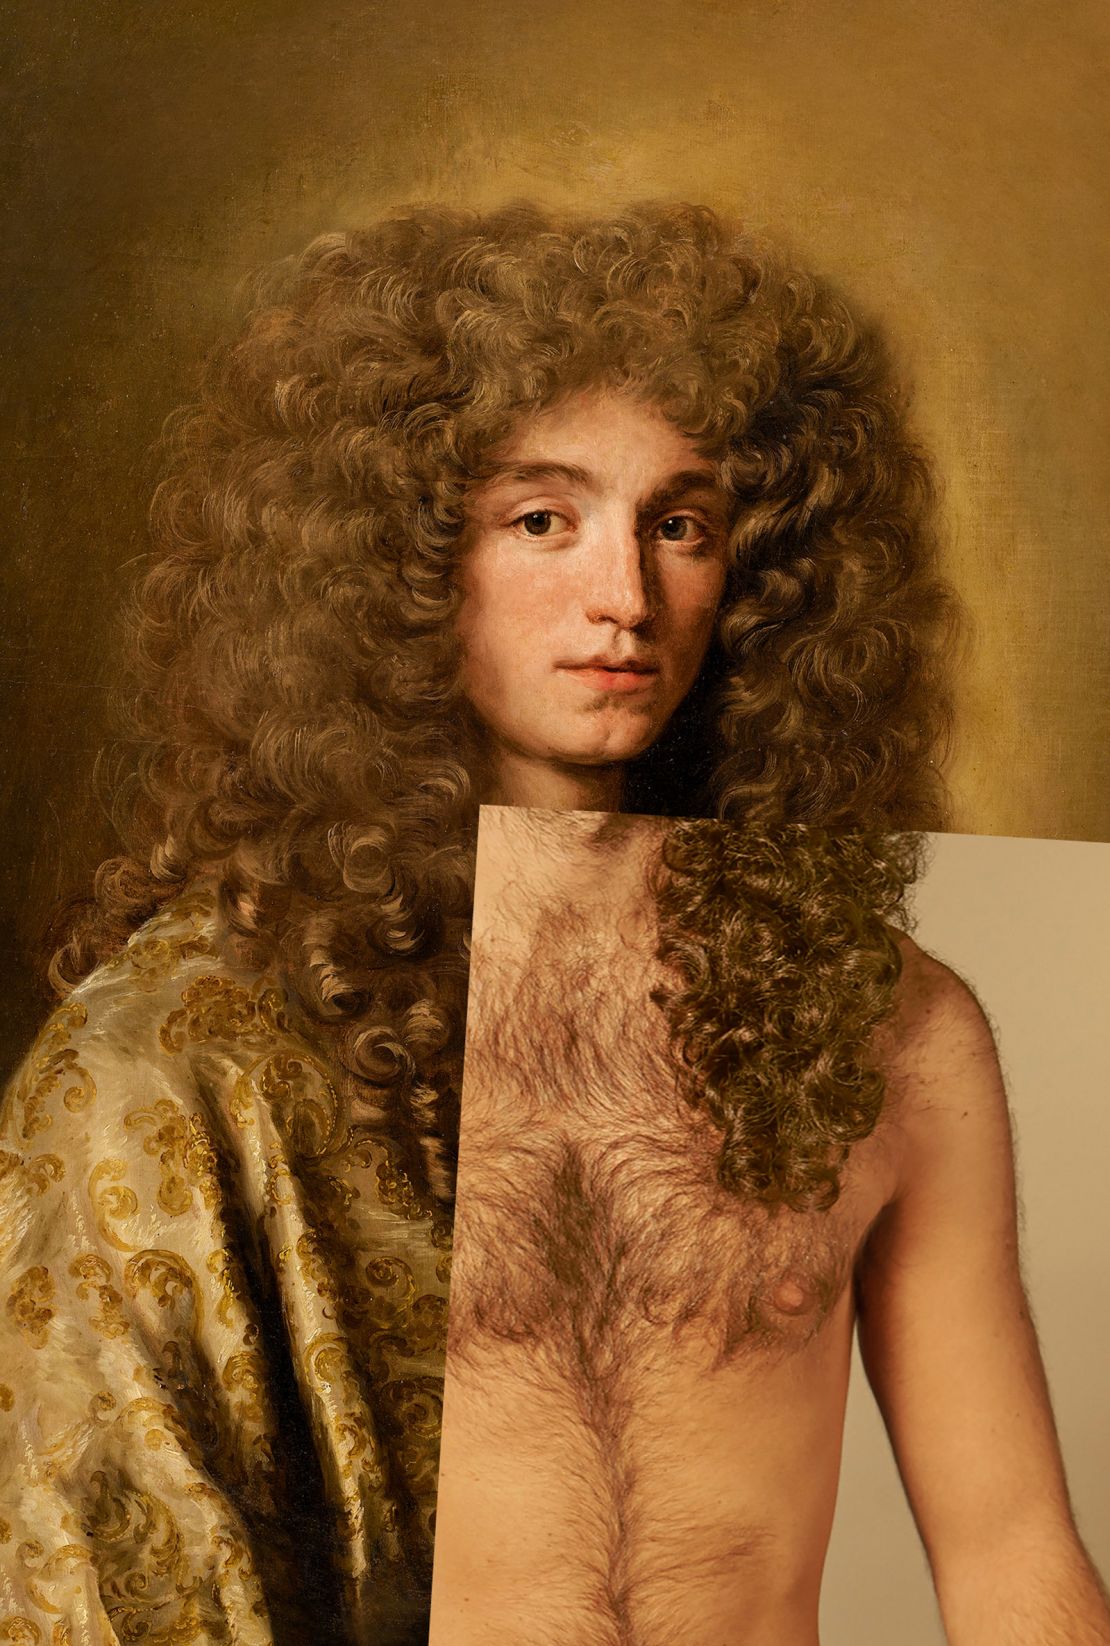 The exposition poster shows a photograph of a man's body hair fused with Flemish painter Jacob Ferdinand Voet's "Portrait of a man," finished before 1989l.